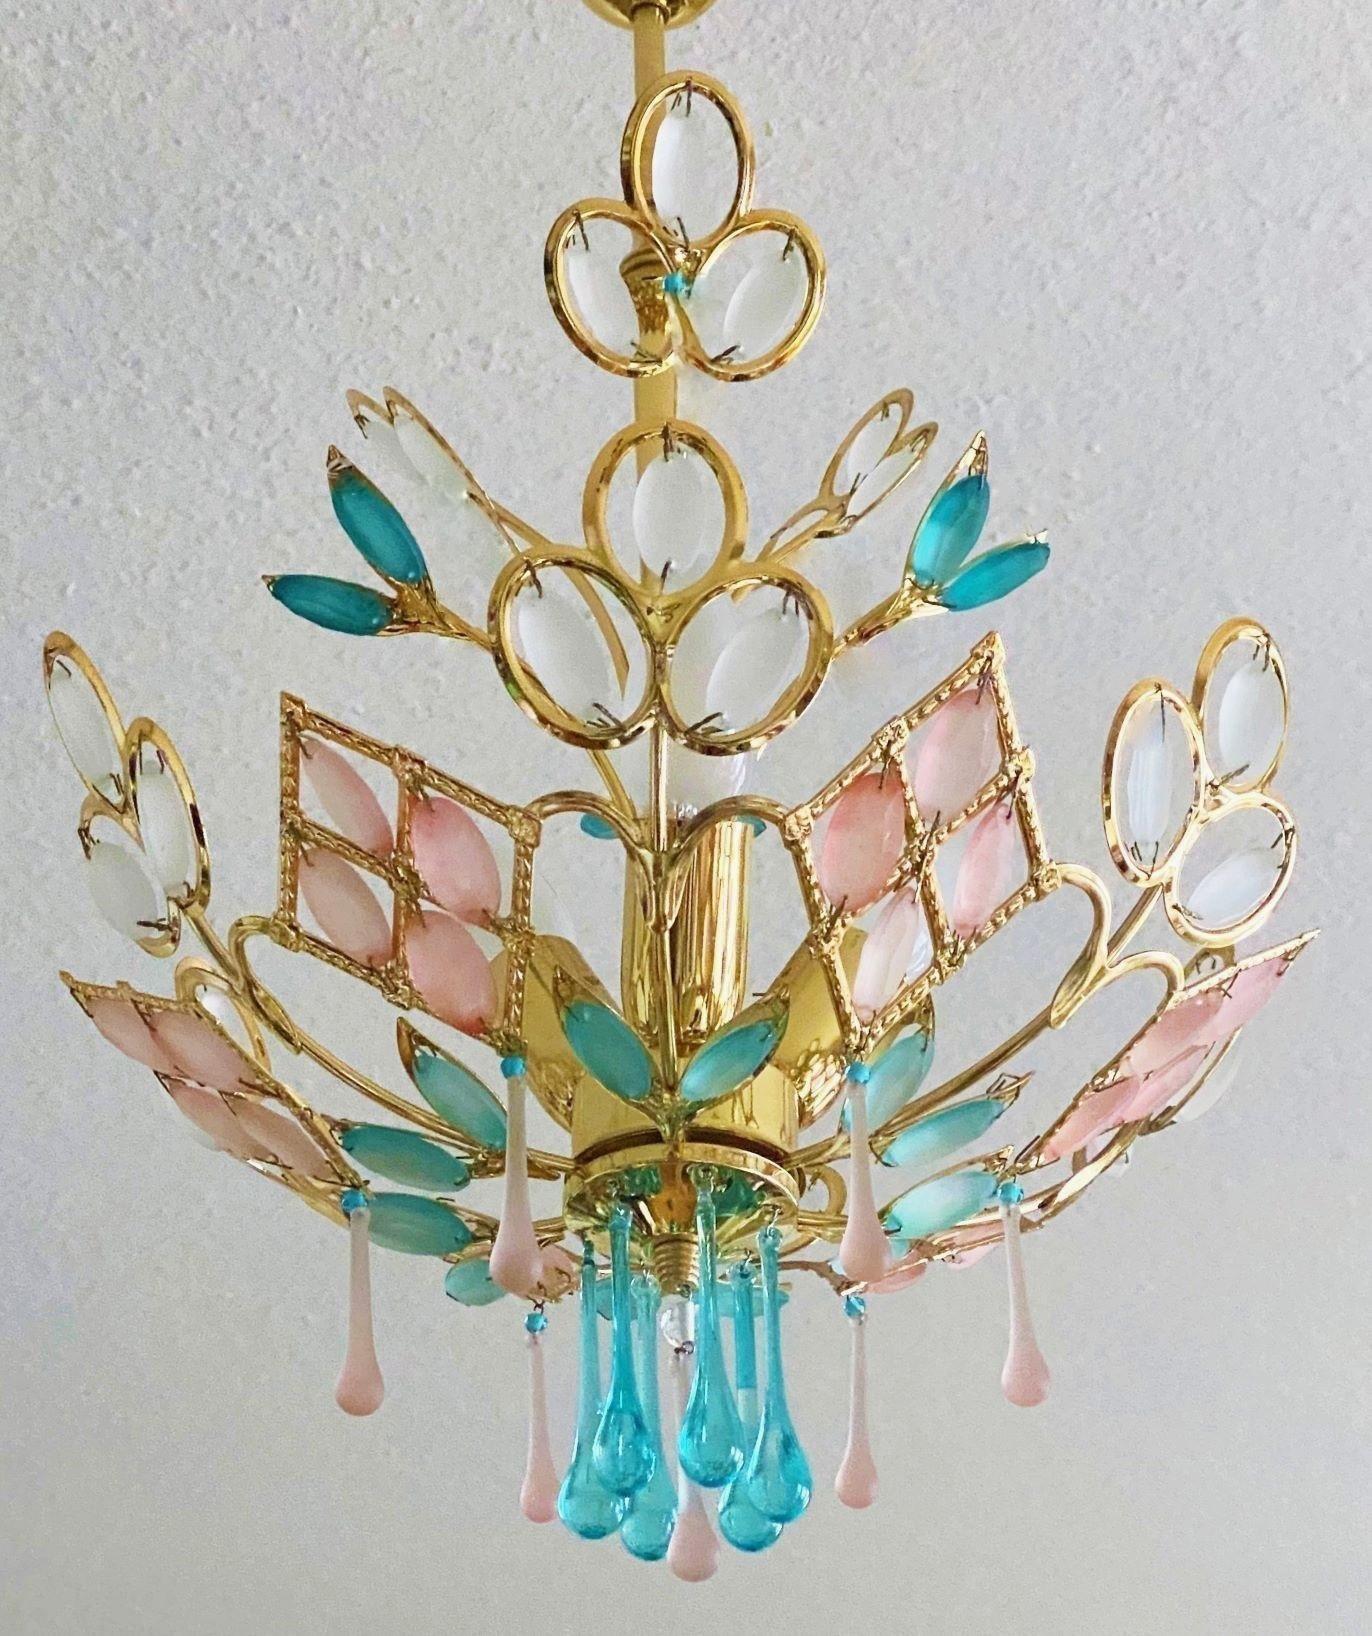 A magnificent romantic ceiling light in Art Deco style of the mid-century, Italy, 1960s. Structure of solid gilded brass topped with lots of Murano frosted glass beads in turquoise blue, pink and white colours.
Beautiful and very decorative piece